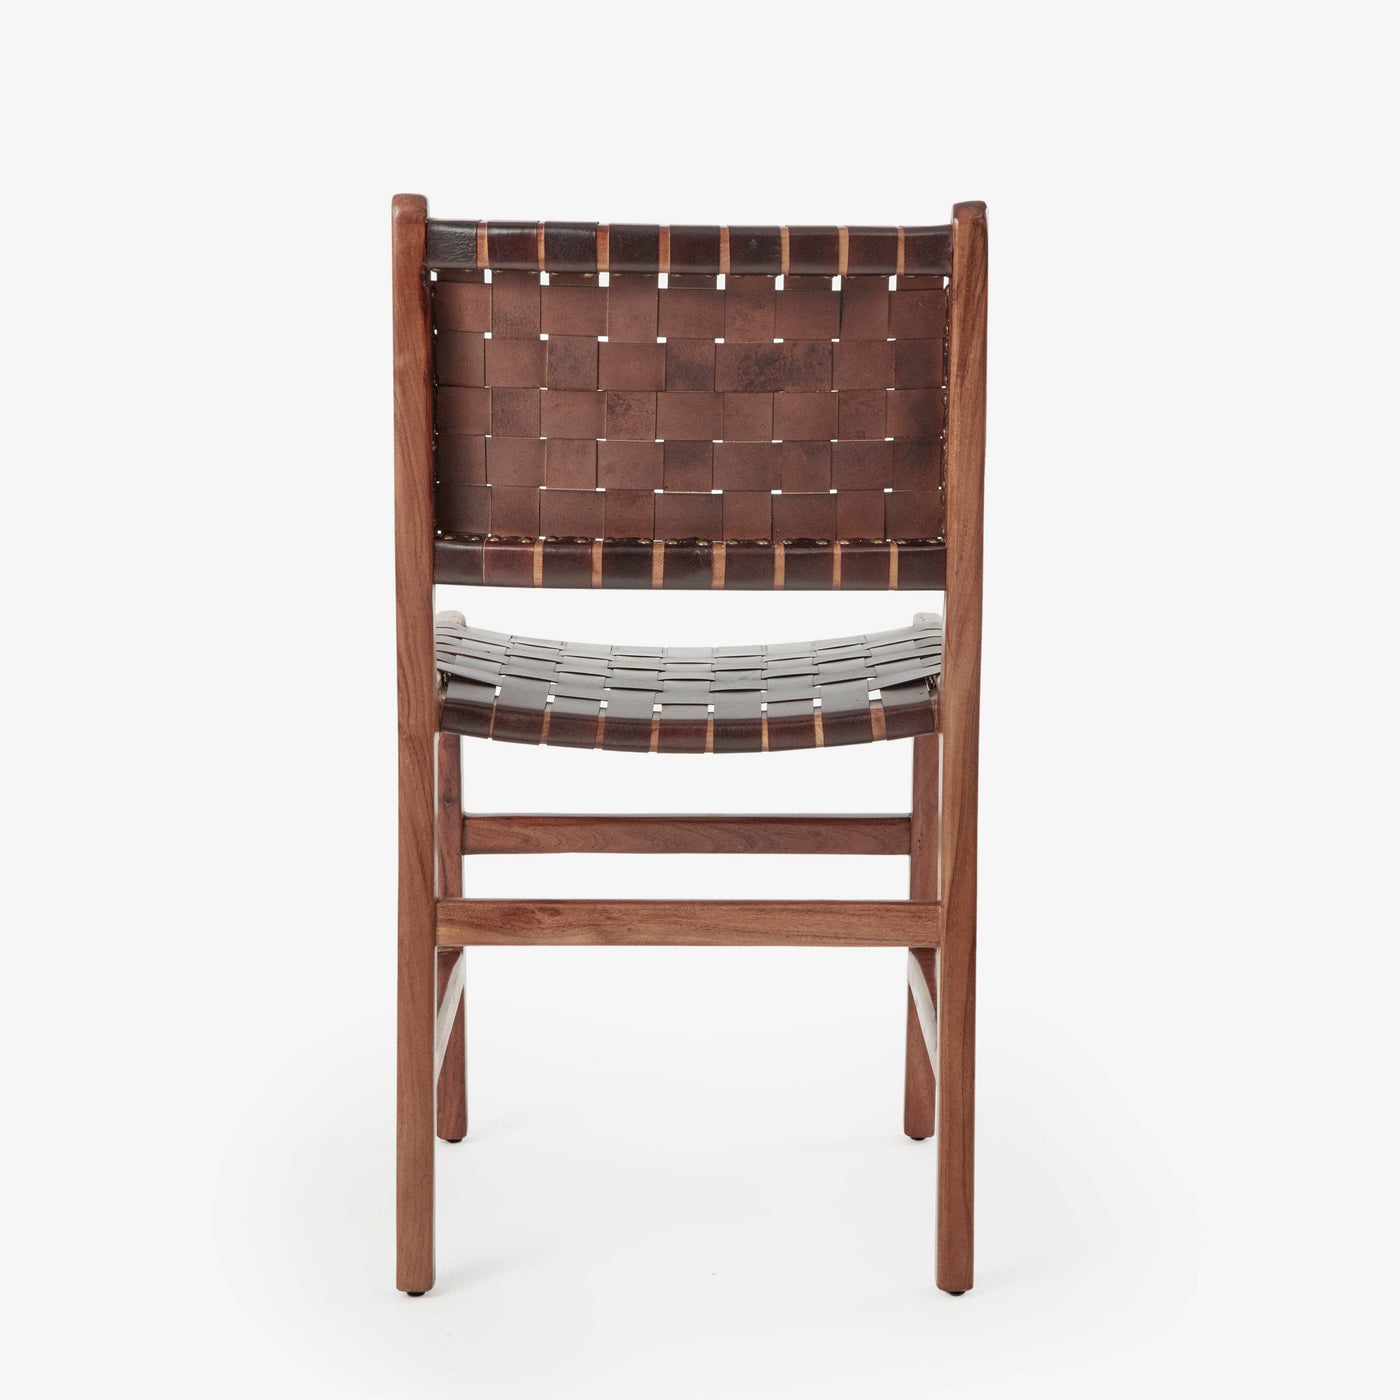 Pomero Woven Leather Dining Chair, Brown Dining Chairs & Benches sazy.com